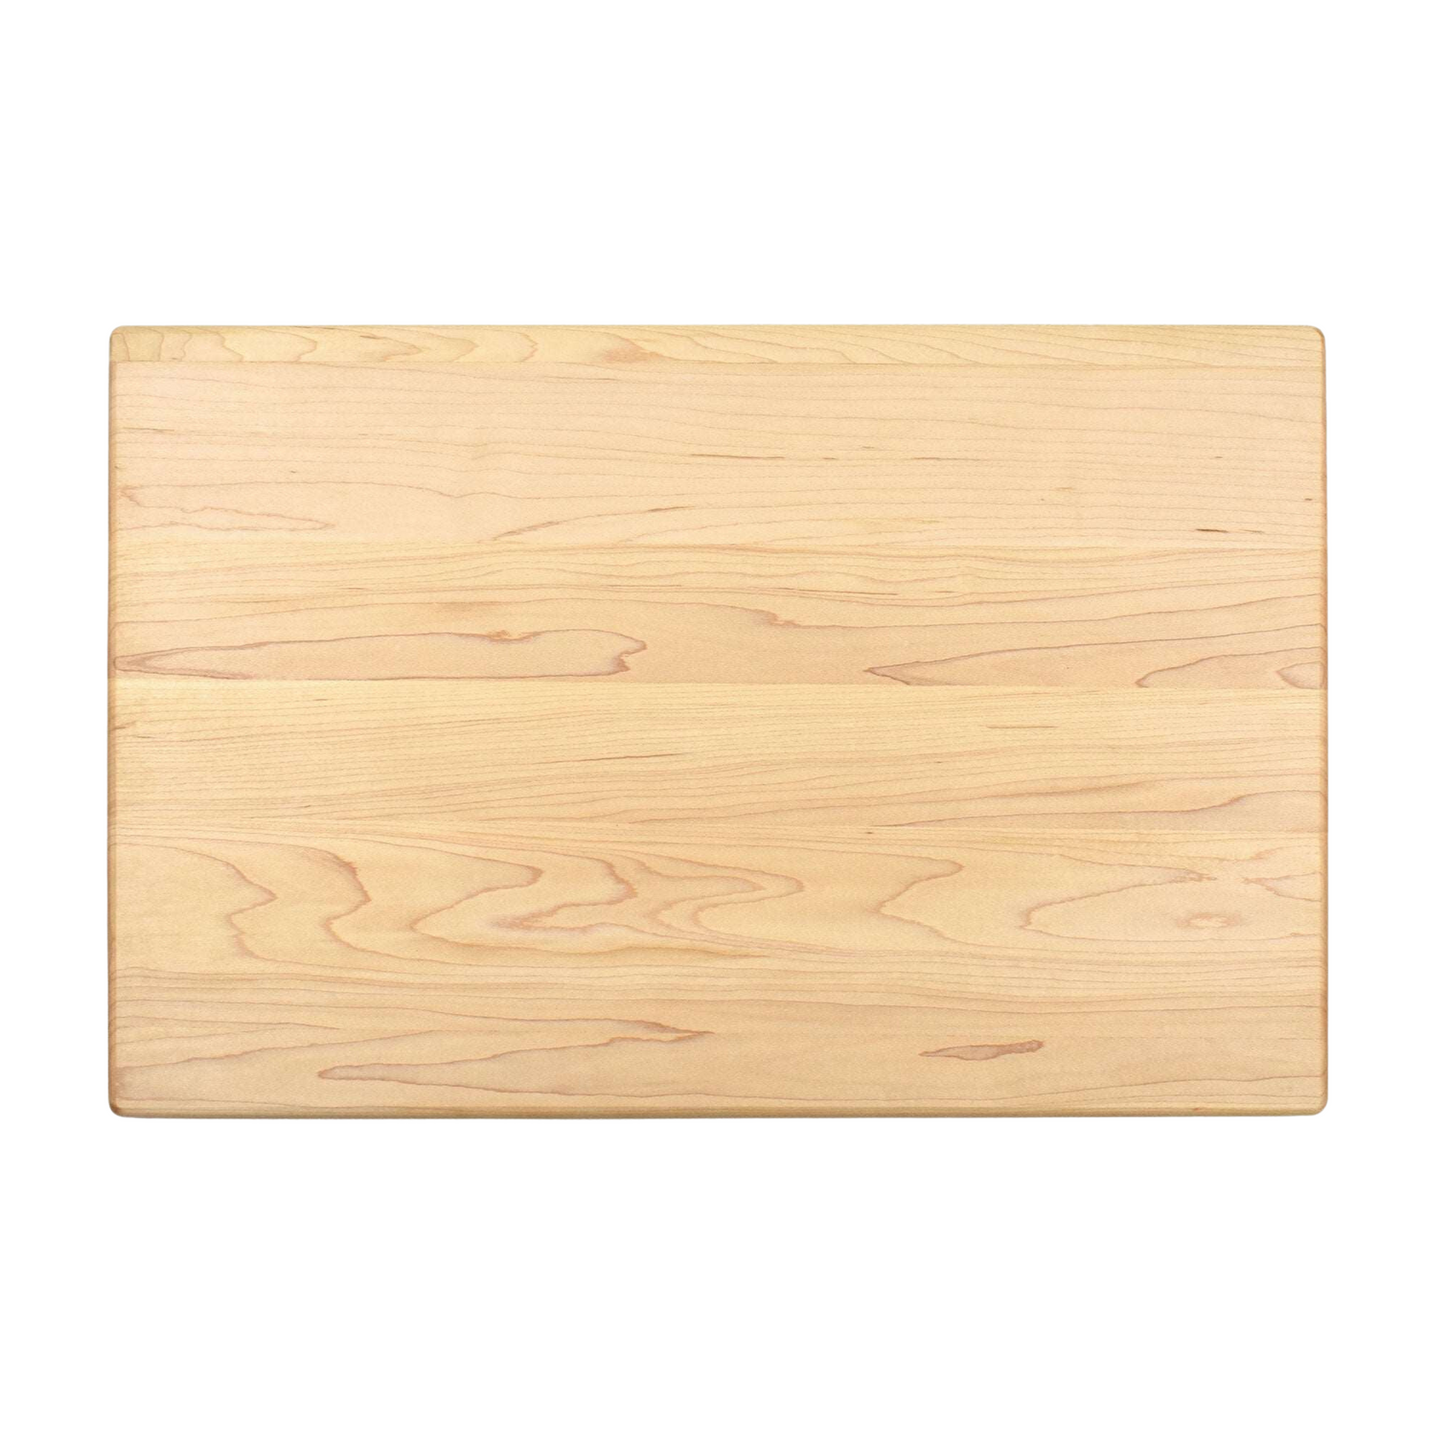 Chop It Like It's Hot Cutting Board - Premium Cutting Boards from Hipster Lasers - Just $40! Shop now at Hipster Lasers